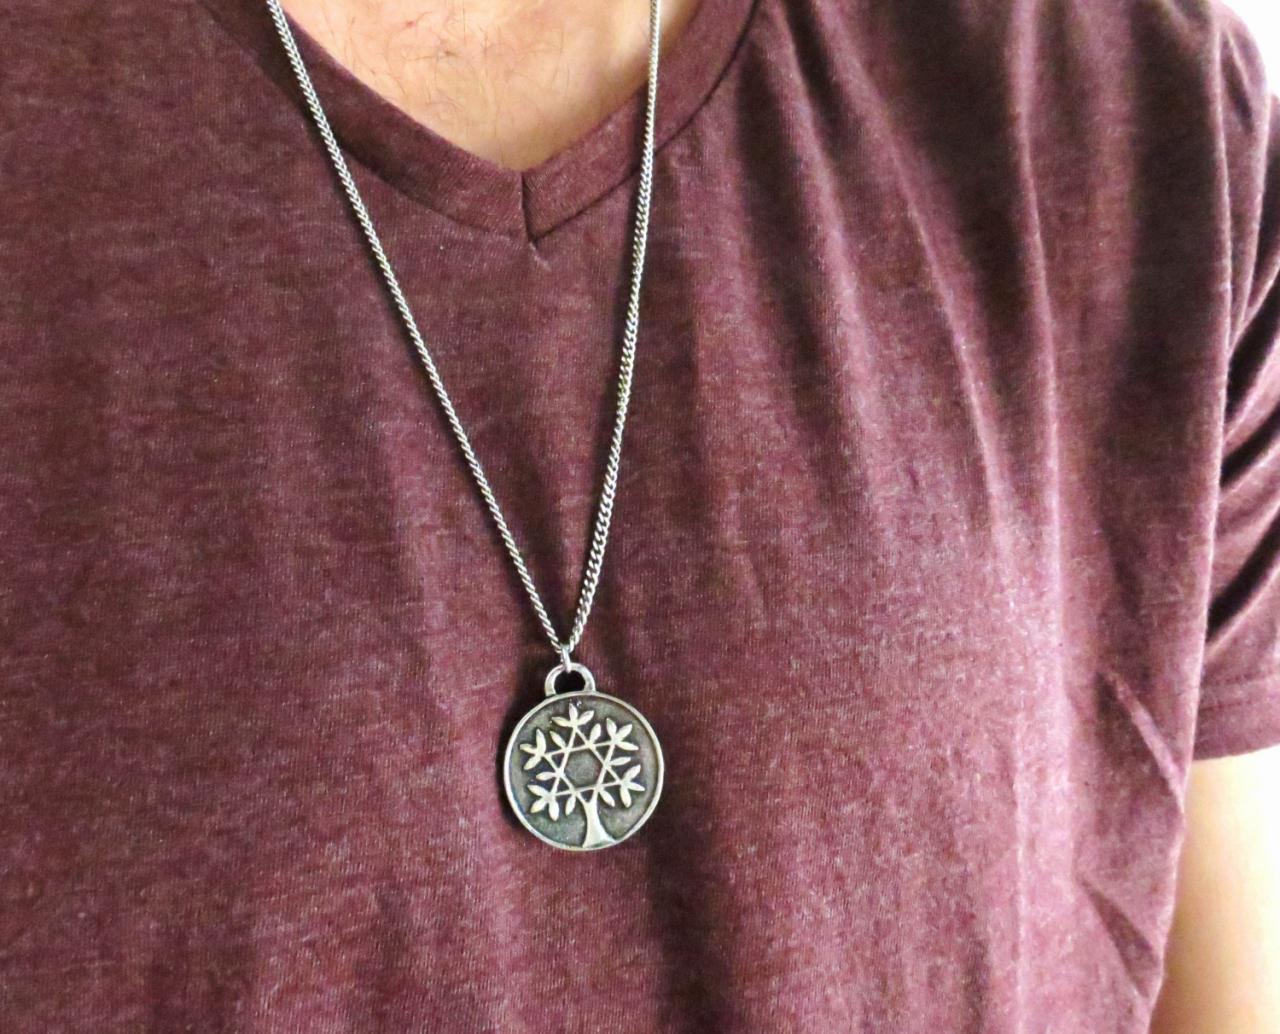 Men's Necklace - Men's Tree Of Life Necklace - Men's Silver Necklace - Mens Jewelry - Necklaces For Men - Jewelry For